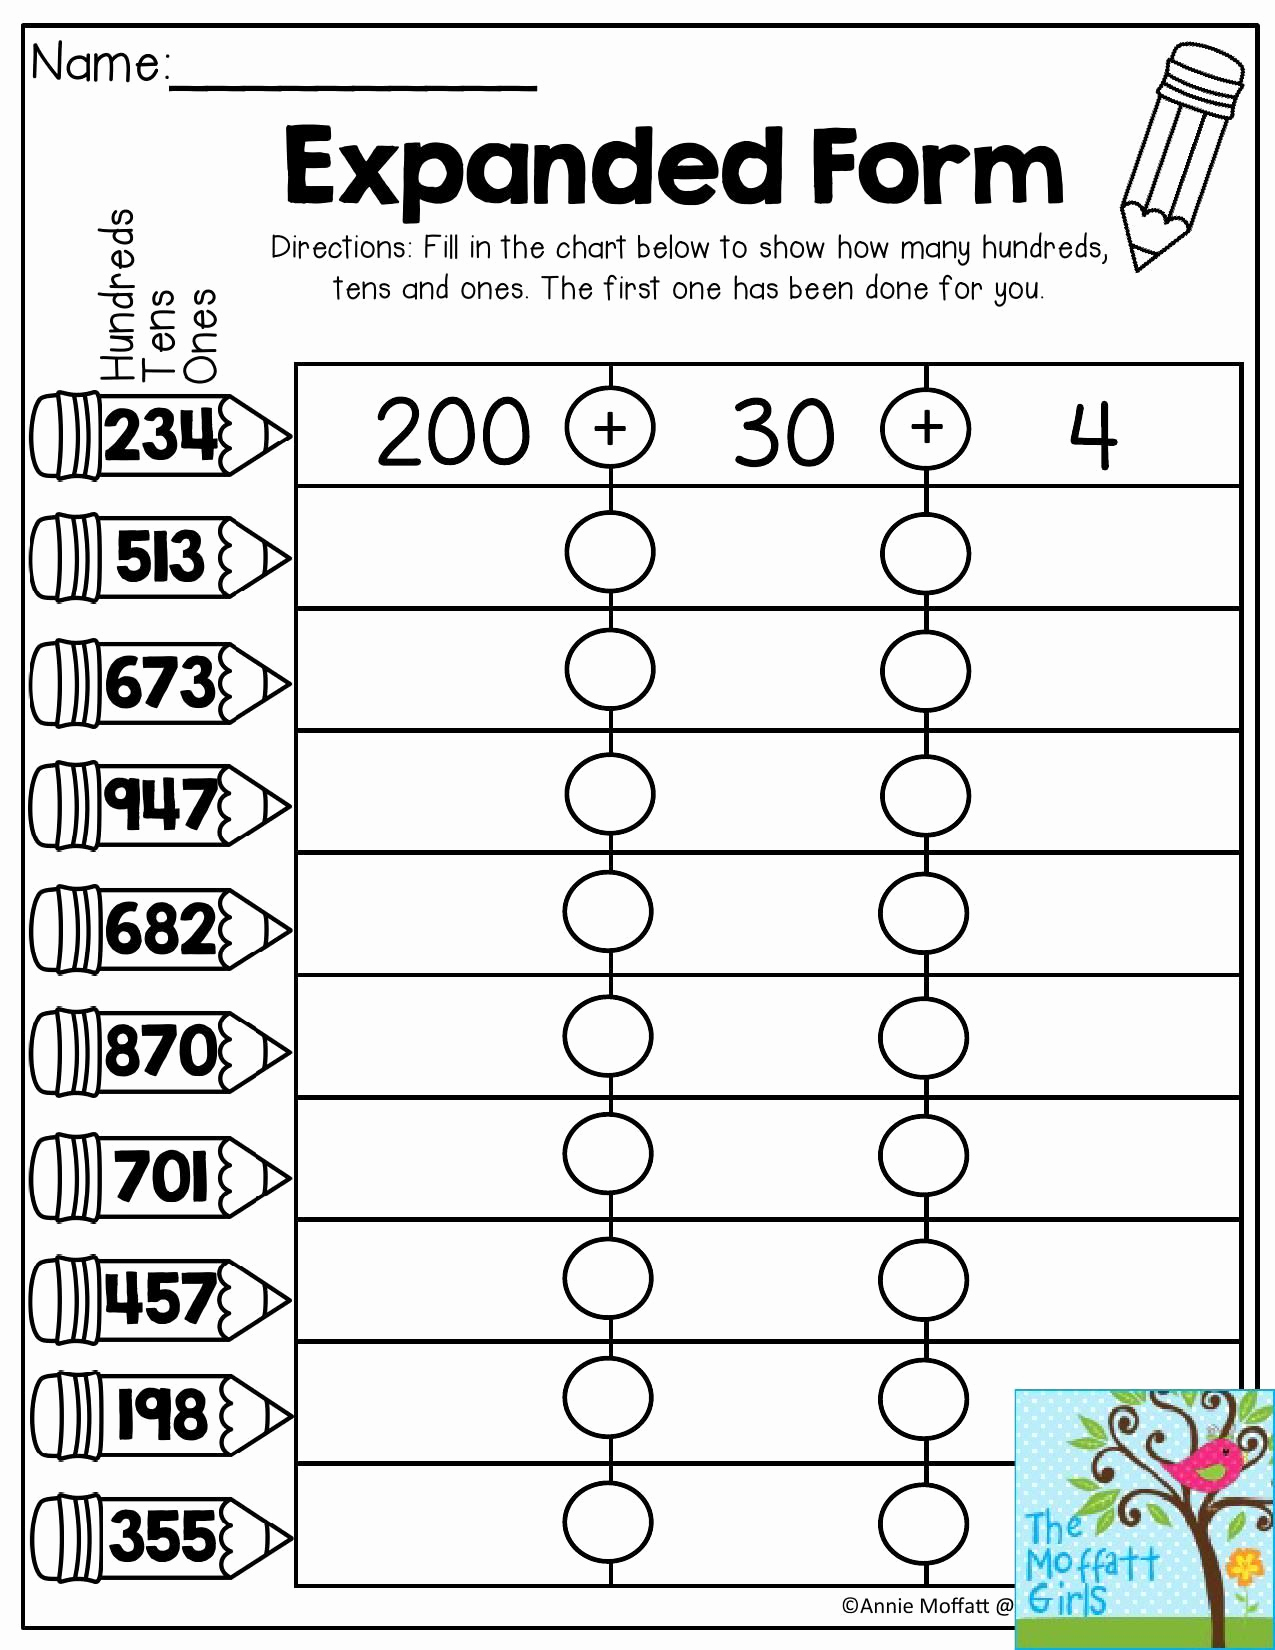 Expanded form Worksheets 1st Grade Lovely Expanded form Fill In the Chart to Show How Many Hundreds